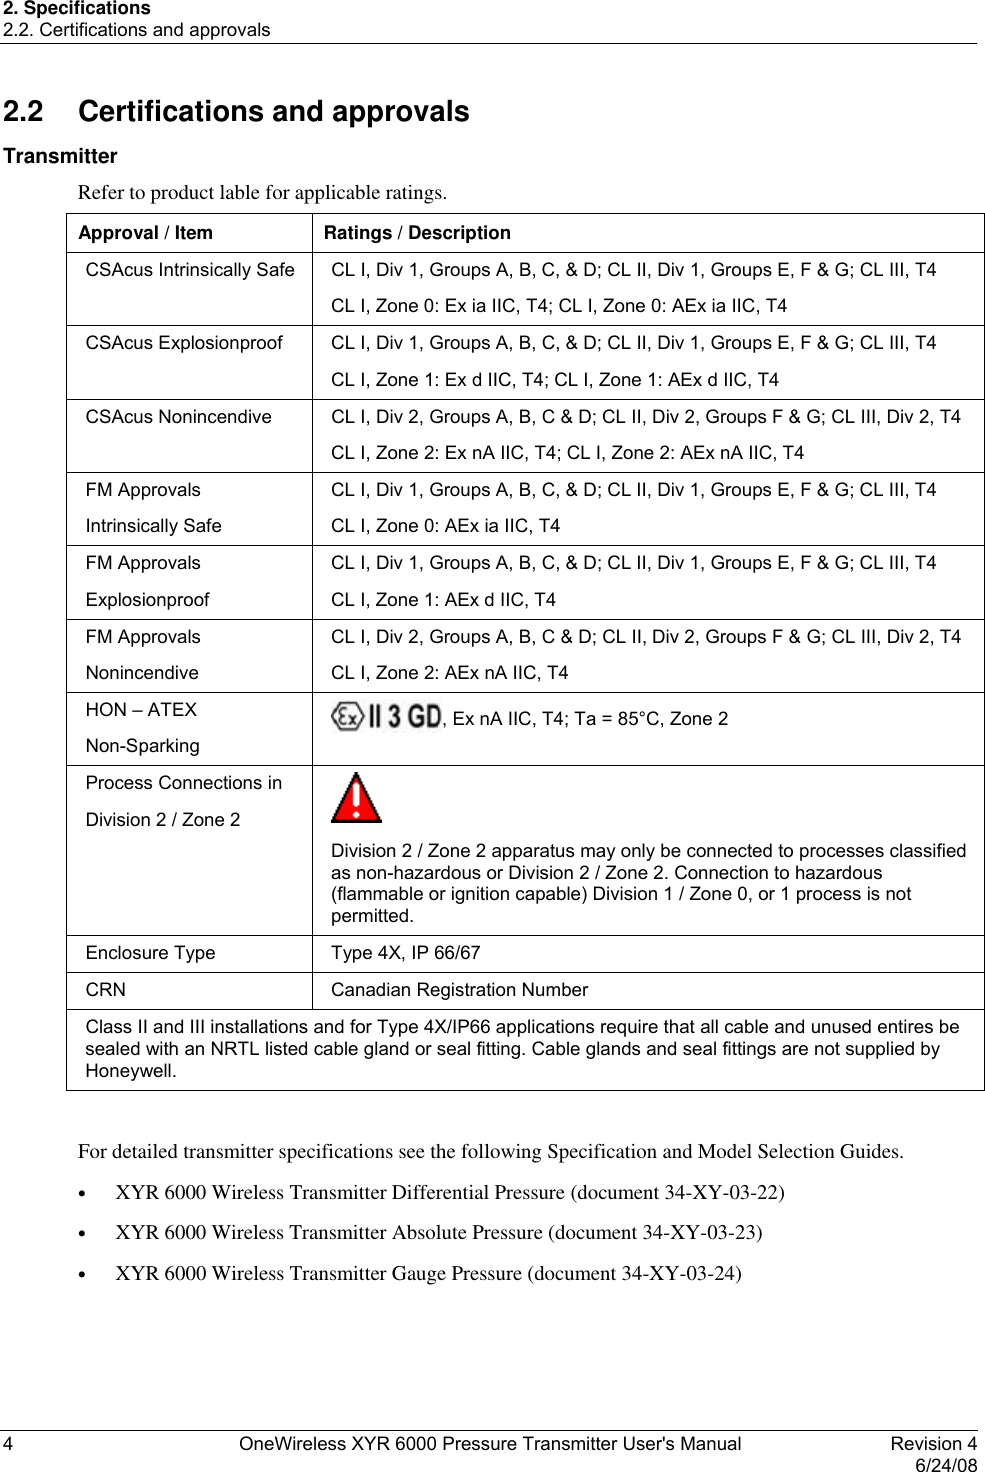 2. Specifications 2.2. Certifications and approvals 4  OneWireless XYR 6000 Pressure Transmitter User&apos;s Manual   Revision 4   6/24/08 2.2  Certifications and approvals Transmitter Refer to product lable for applicable ratings. Approval / Item  Ratings / Description CSAcus Intrinsically Safe  CL I, Div 1, Groups A, B, C, &amp; D; CL II, Div 1, Groups E, F &amp; G; CL III, T4 CL I, Zone 0: Ex ia IIC, T4; CL I, Zone 0: AEx ia IIC, T4  CSAcus Explosionproof  CL I, Div 1, Groups A, B, C, &amp; D; CL II, Div 1, Groups E, F &amp; G; CL III, T4 CL I, Zone 1: Ex d IIC, T4; CL I, Zone 1: AEx d IIC, T4 CSAcus Nonincendive  CL I, Div 2, Groups A, B, C &amp; D; CL II, Div 2, Groups F &amp; G; CL III, Div 2, T4 CL I, Zone 2: Ex nA IIC, T4; CL I, Zone 2: AEx nA IIC, T4 FM Approvals Intrinsically Safe CL I, Div 1, Groups A, B, C, &amp; D; CL II, Div 1, Groups E, F &amp; G; CL III, T4 CL I, Zone 0: AEx ia IIC, T4  FM Approvals Explosionproof CL I, Div 1, Groups A, B, C, &amp; D; CL II, Div 1, Groups E, F &amp; G; CL III, T4 CL I, Zone 1: AEx d IIC, T4 FM Approvals Nonincendive CL I, Div 2, Groups A, B, C &amp; D; CL II, Div 2, Groups F &amp; G; CL III, Div 2, T4 CL I, Zone 2: AEx nA IIC, T4 HON – ATEX Non-Sparking , Ex nA IIC, T4; Ta = 85°C, Zone 2 Process Connections in Division 2 / Zone 2    Division 2 / Zone 2 apparatus may only be connected to processes classified as non-hazardous or Division 2 / Zone 2. Connection to hazardous (flammable or ignition capable) Division 1 / Zone 0, or 1 process is not permitted. Enclosure Type  Type 4X, IP 66/67 CRN  Canadian Registration Number Class II and III installations and for Type 4X/IP66 applications require that all cable and unused entires be sealed with an NRTL listed cable gland or seal fitting. Cable glands and seal fittings are not supplied by Honeywell.  For detailed transmitter specifications see the following Specification and Model Selection Guides. •  XYR 6000 Wireless Transmitter Differential Pressure (document 34-XY-03-22) •  XYR 6000 Wireless Transmitter Absolute Pressure (document 34-XY-03-23) •  XYR 6000 Wireless Transmitter Gauge Pressure (document 34-XY-03-24)  